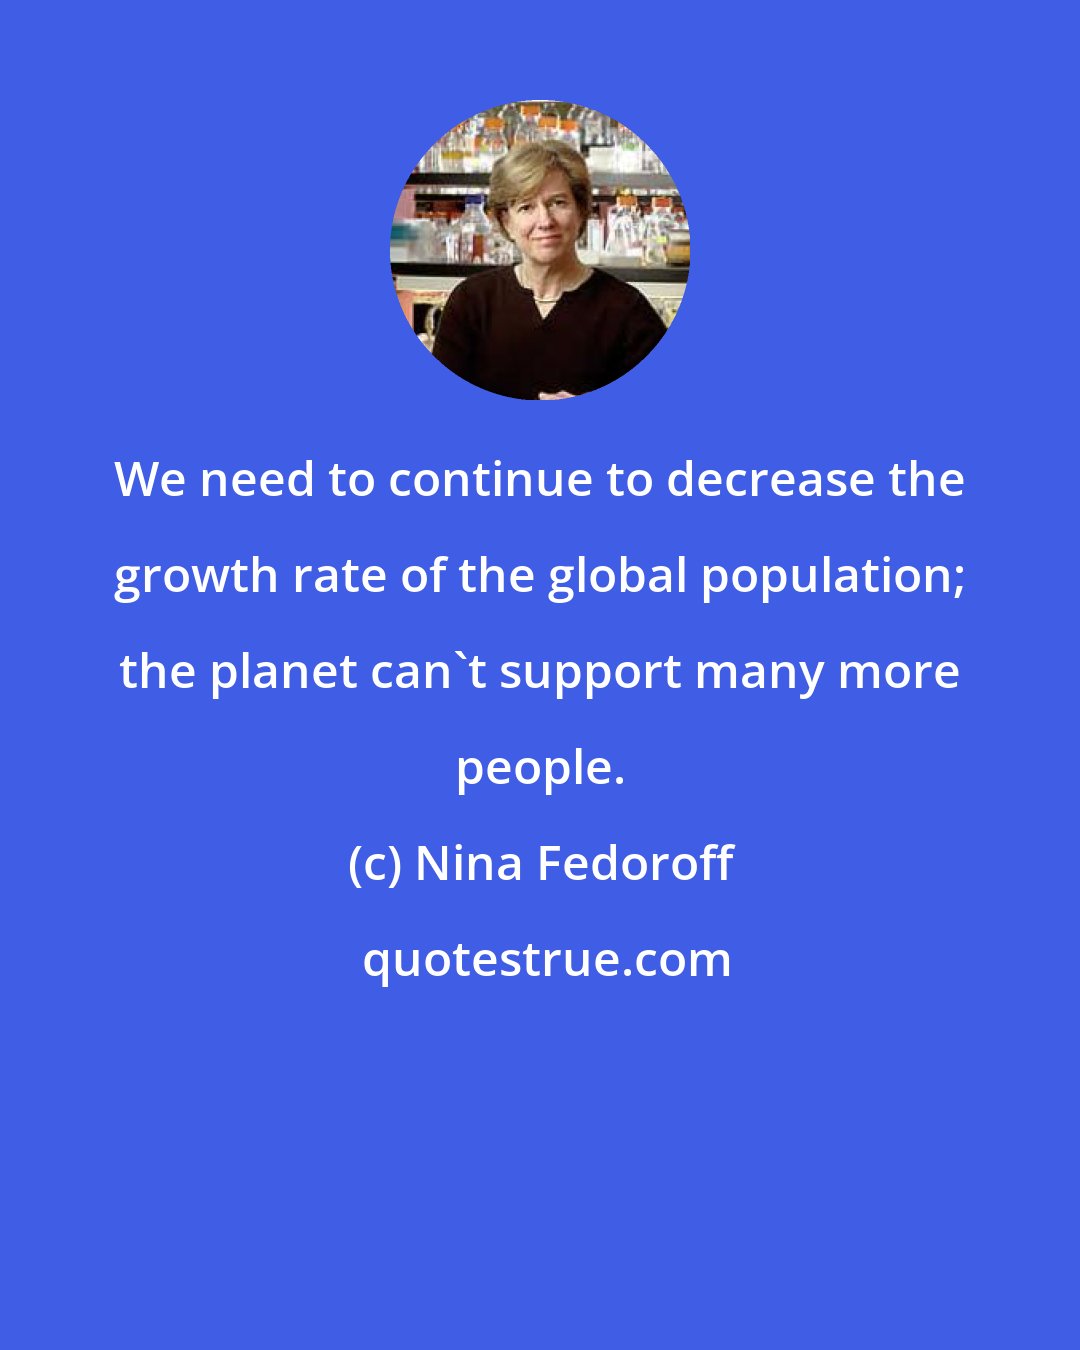 Nina Fedoroff: We need to continue to decrease the growth rate of the global population; the planet can't support many more people.